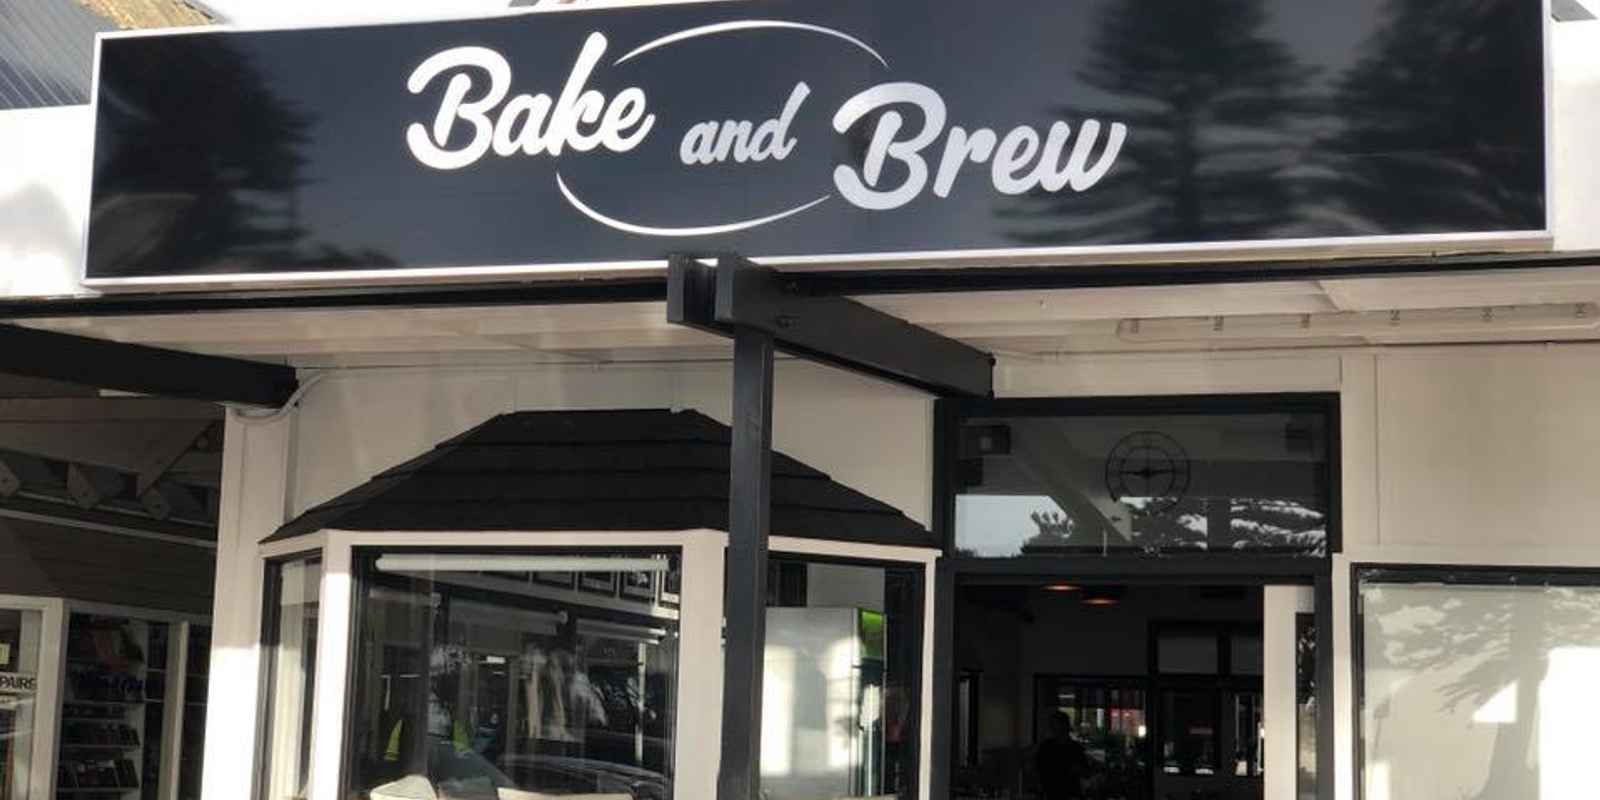 Bake and Brew